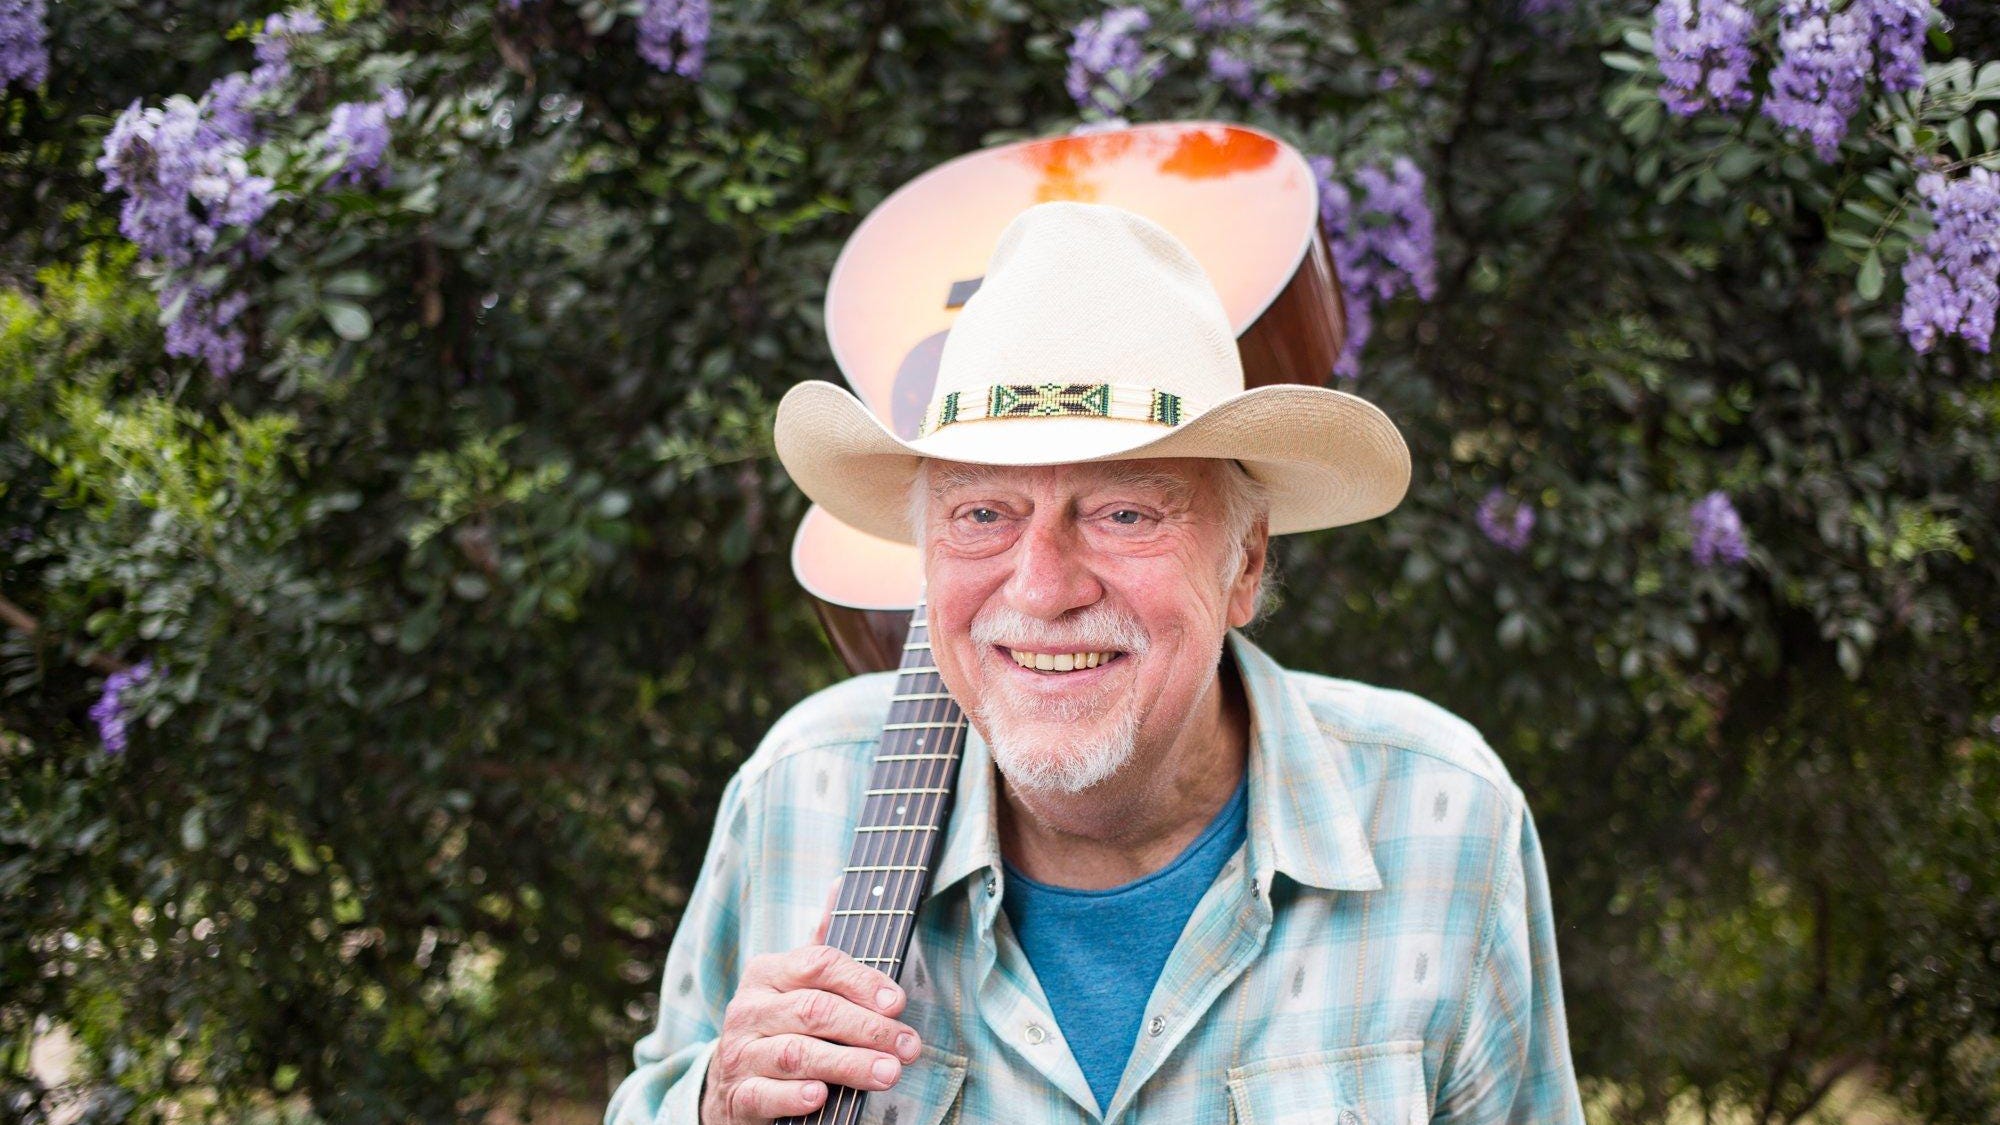 Jerry Jeff Walker, seen here in 1993, was a Texas troubadour who helped define Austin culture for decades.